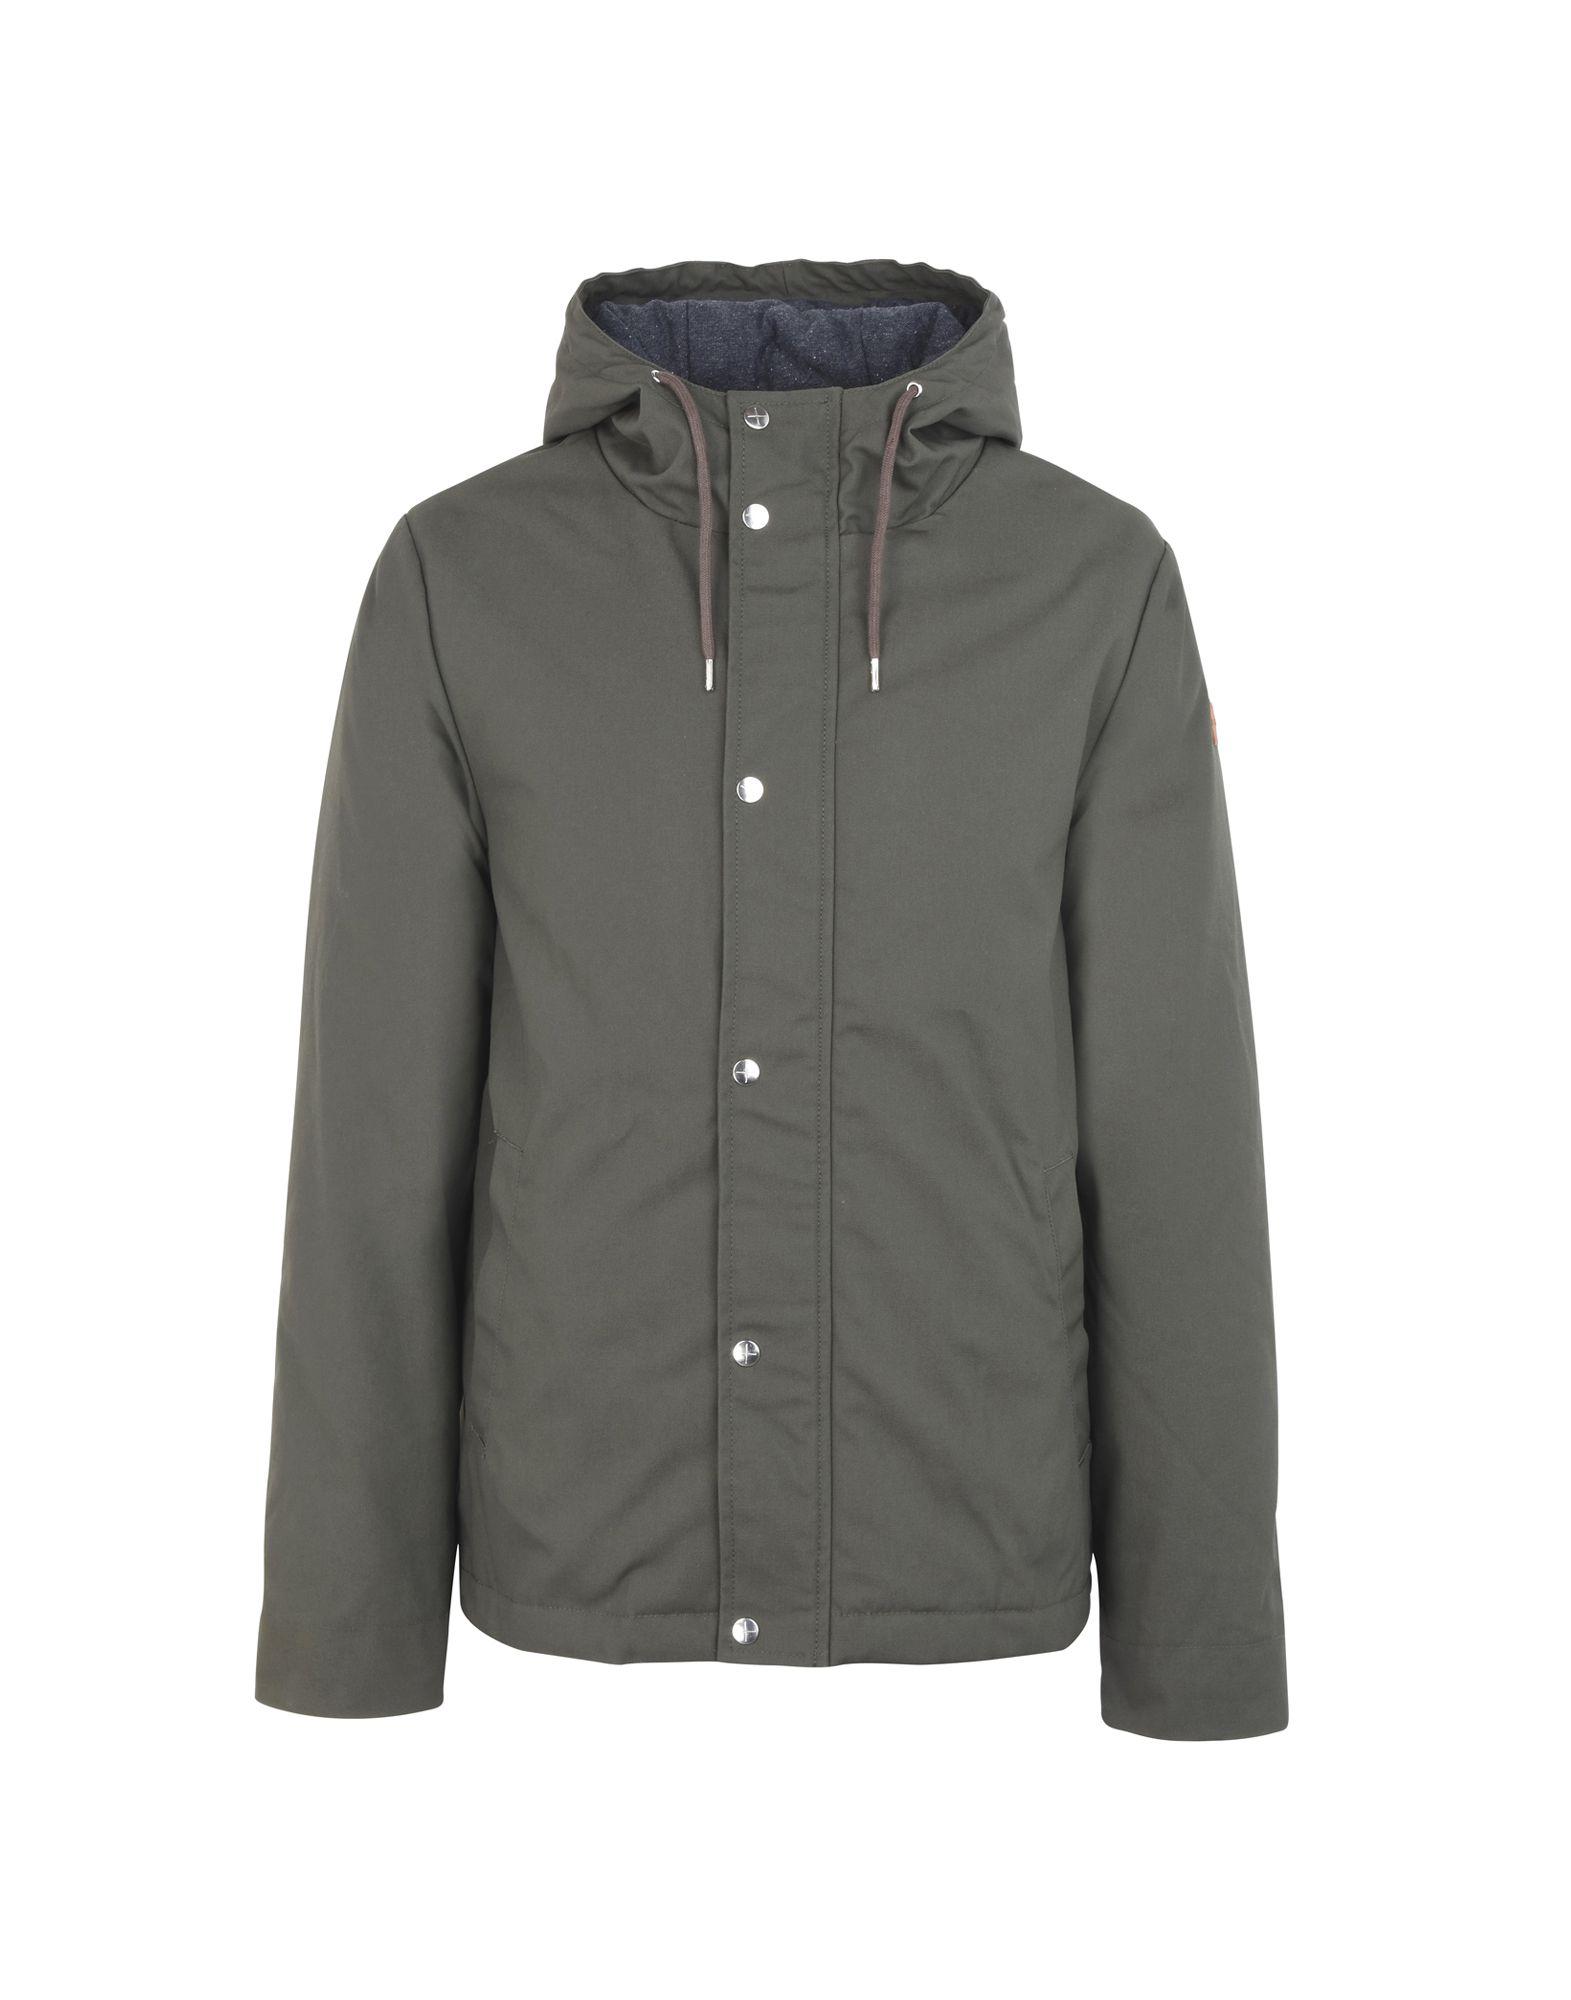 RVLT Synthetic Jacket in Military Green (Green) for Men - Lyst